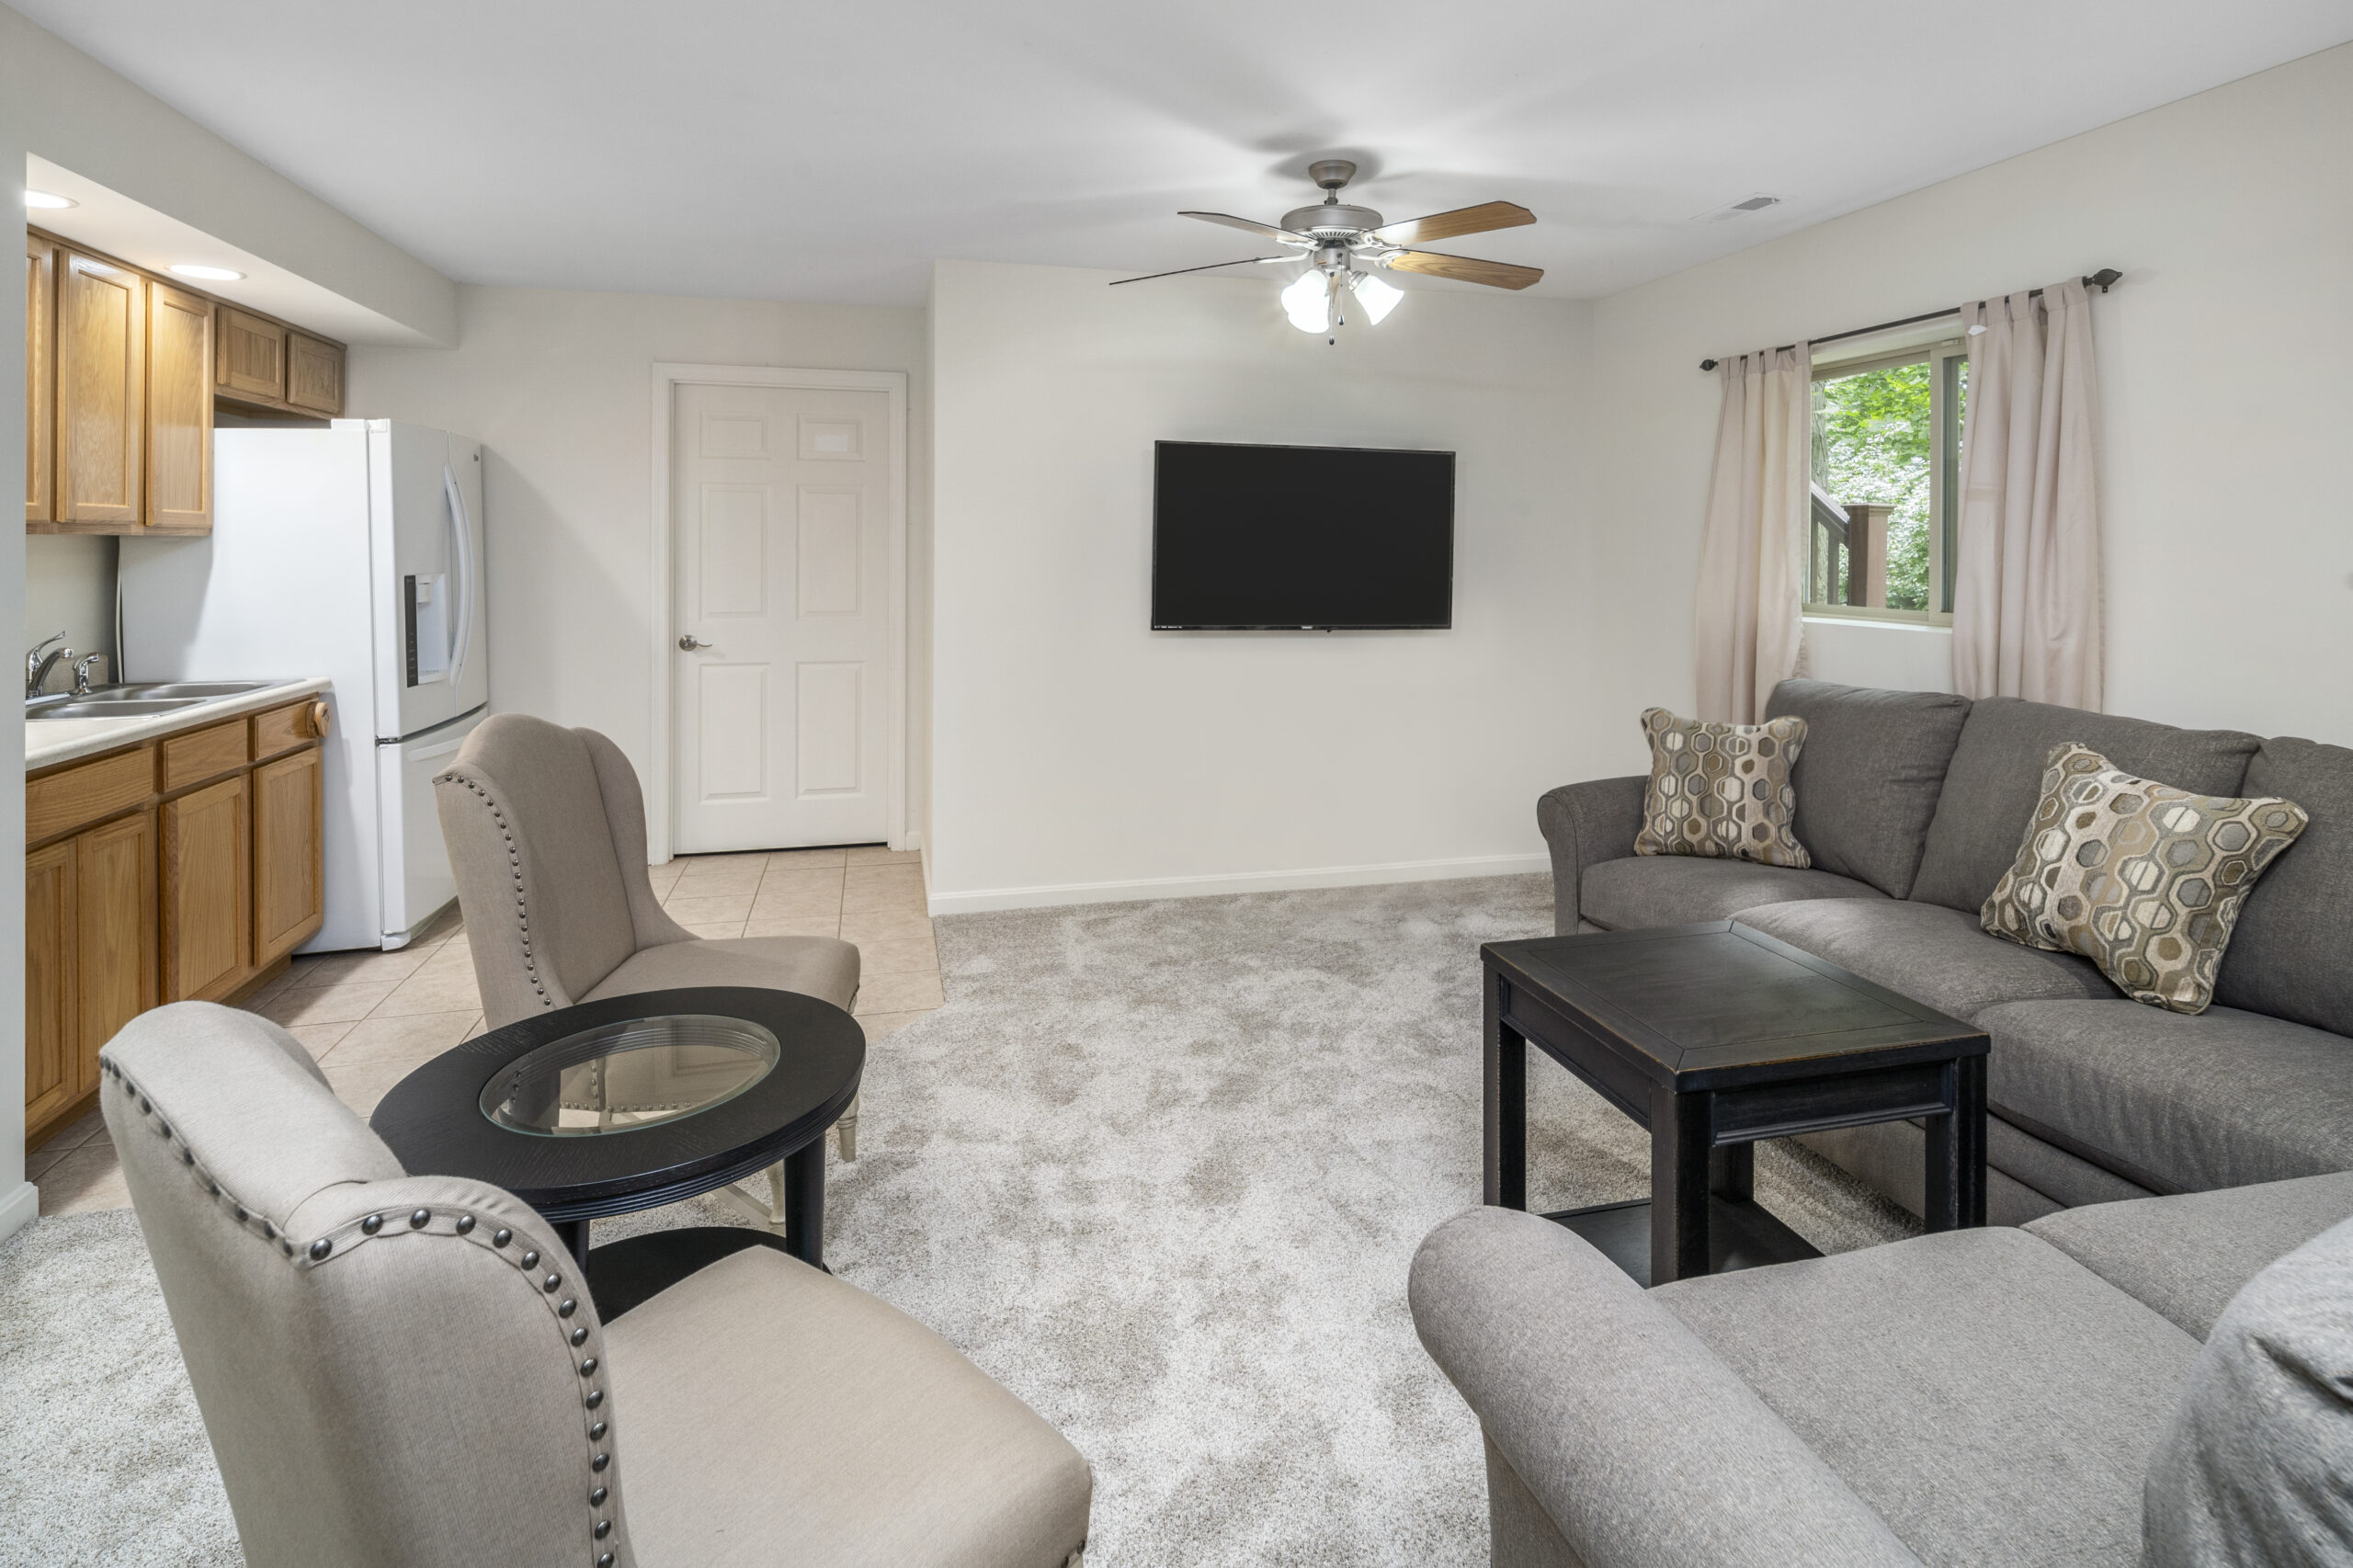 Living room in one of our Dual diagnosis treatment centers in ohio with gray couches and carpet